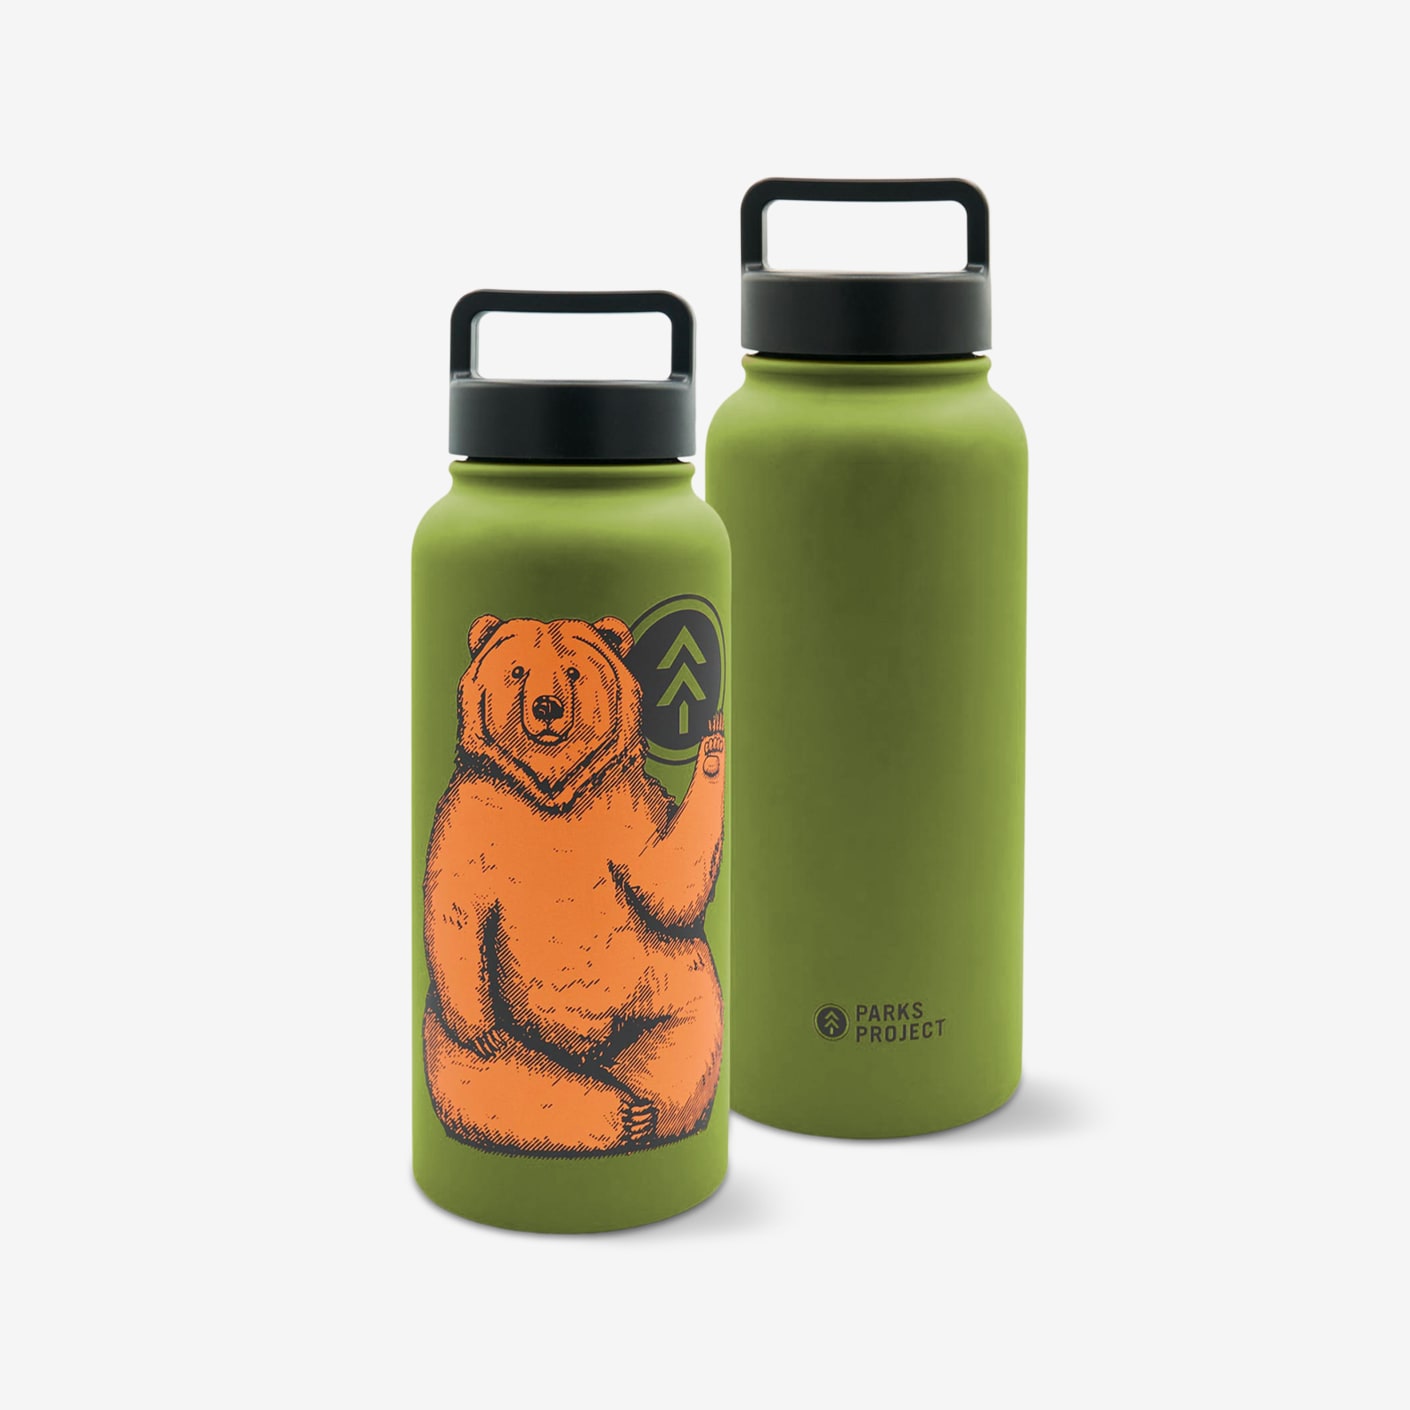 Shop National Park Welcome 32oz. Insulated Water Bottle – Parks Project